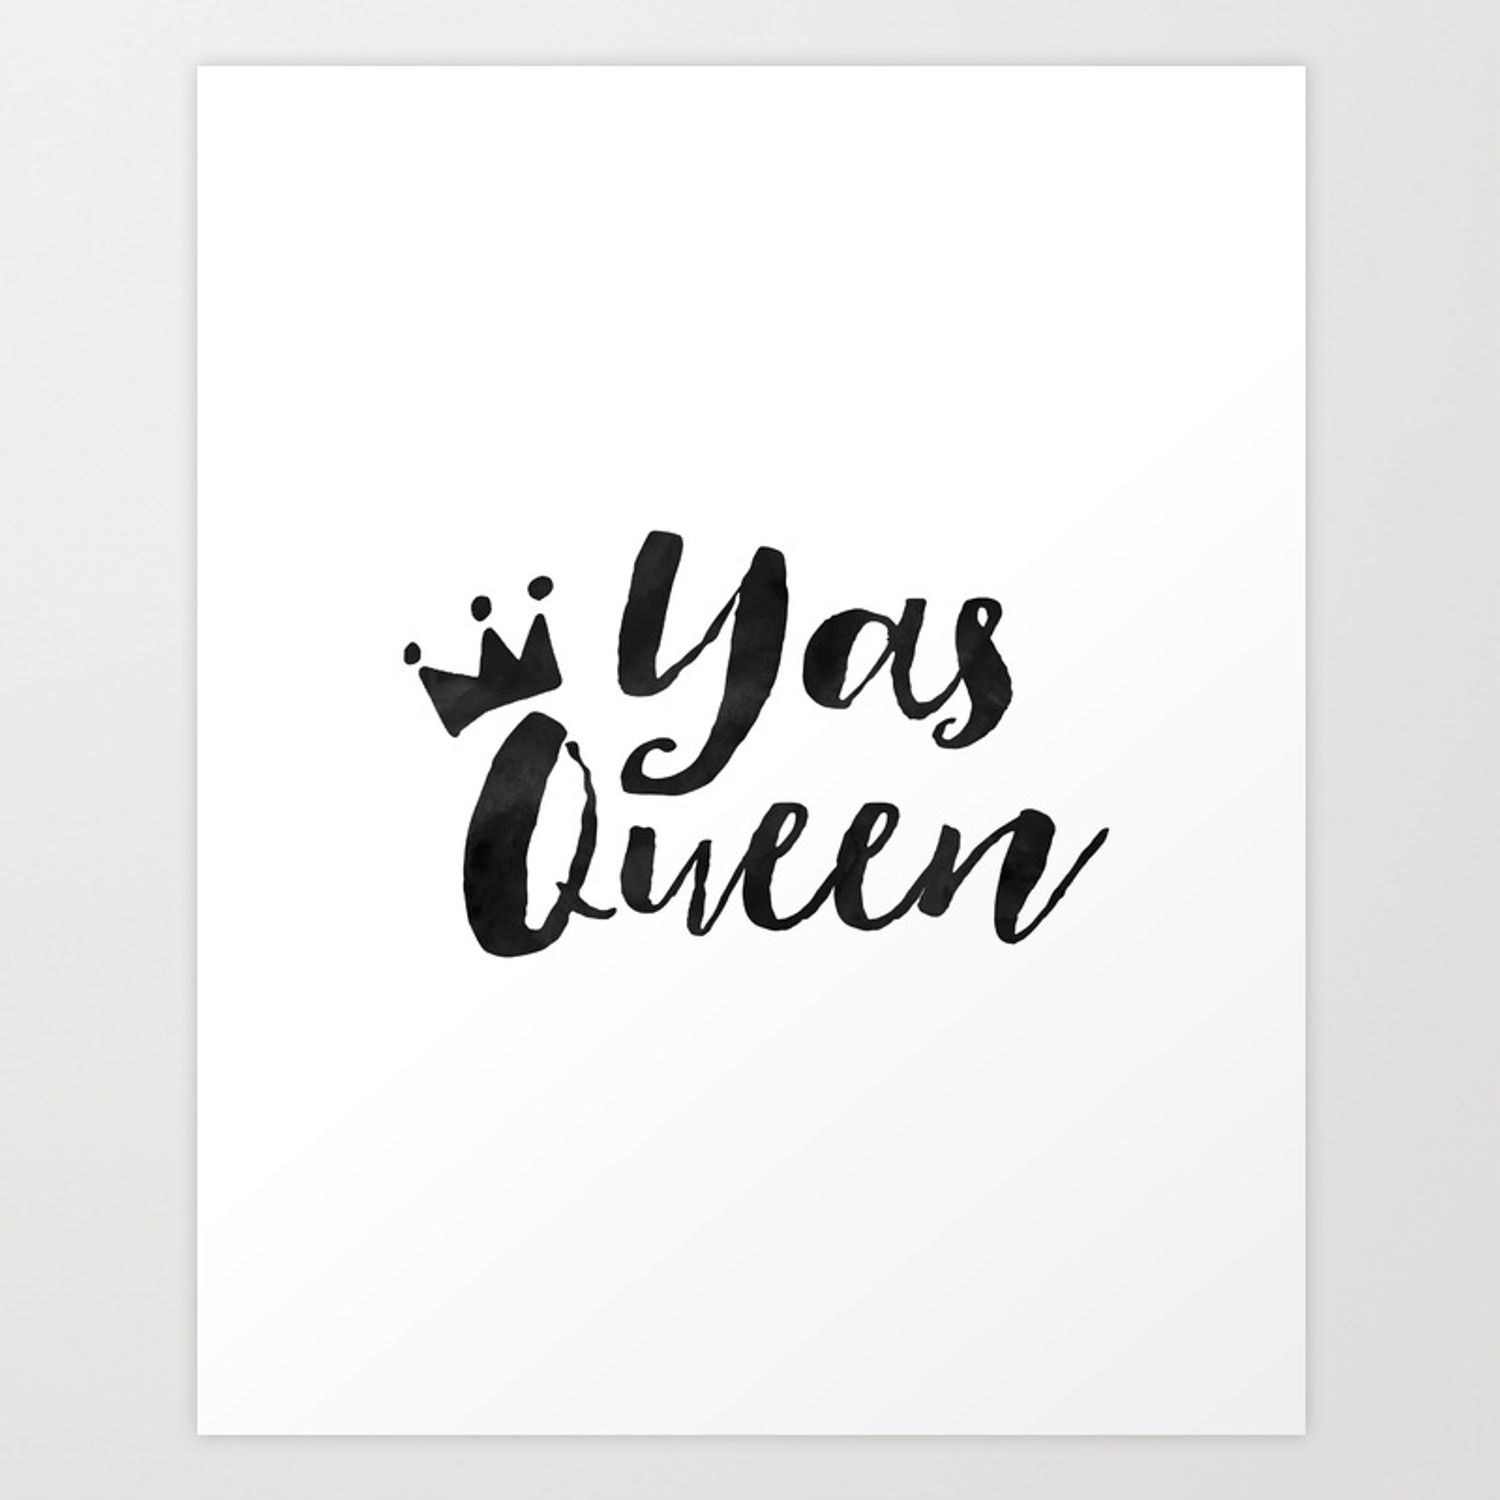 YAS QUEEN QUOTE, Girls Room Decor, Funny Print, Yas Kween Quote, Girly Print, Girl Boss, Like A Boss, Quot Art Print